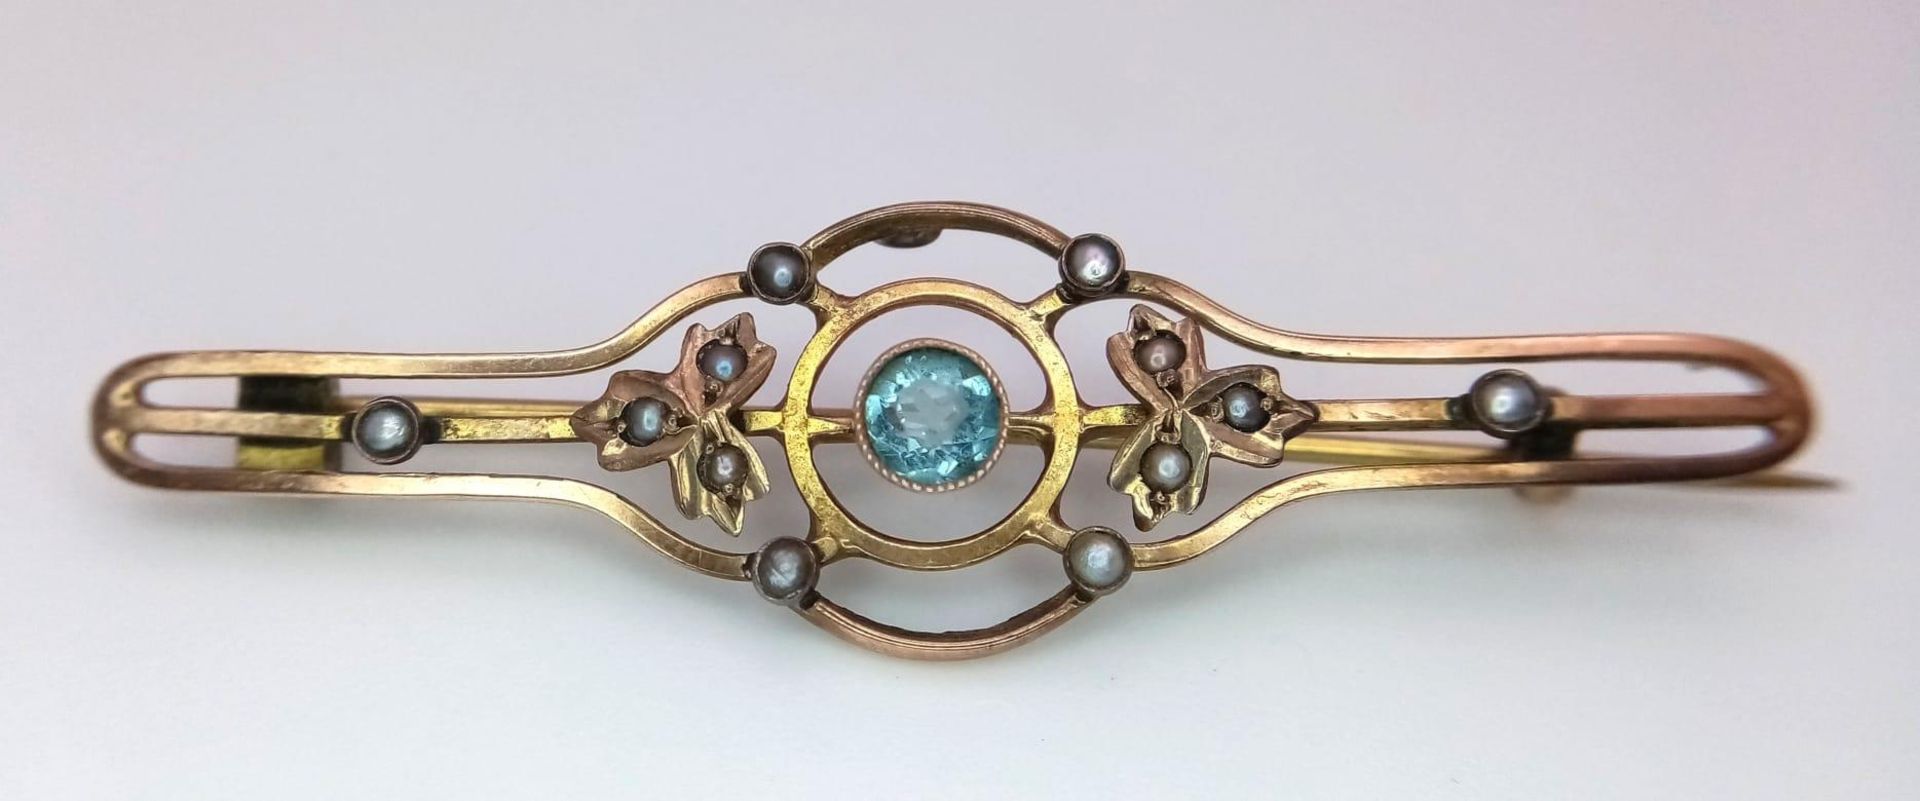 Two Victorian 10 K yellow gold brooches with seed pearls and a variety of stones. Lengths: 39 mm and - Image 3 of 5